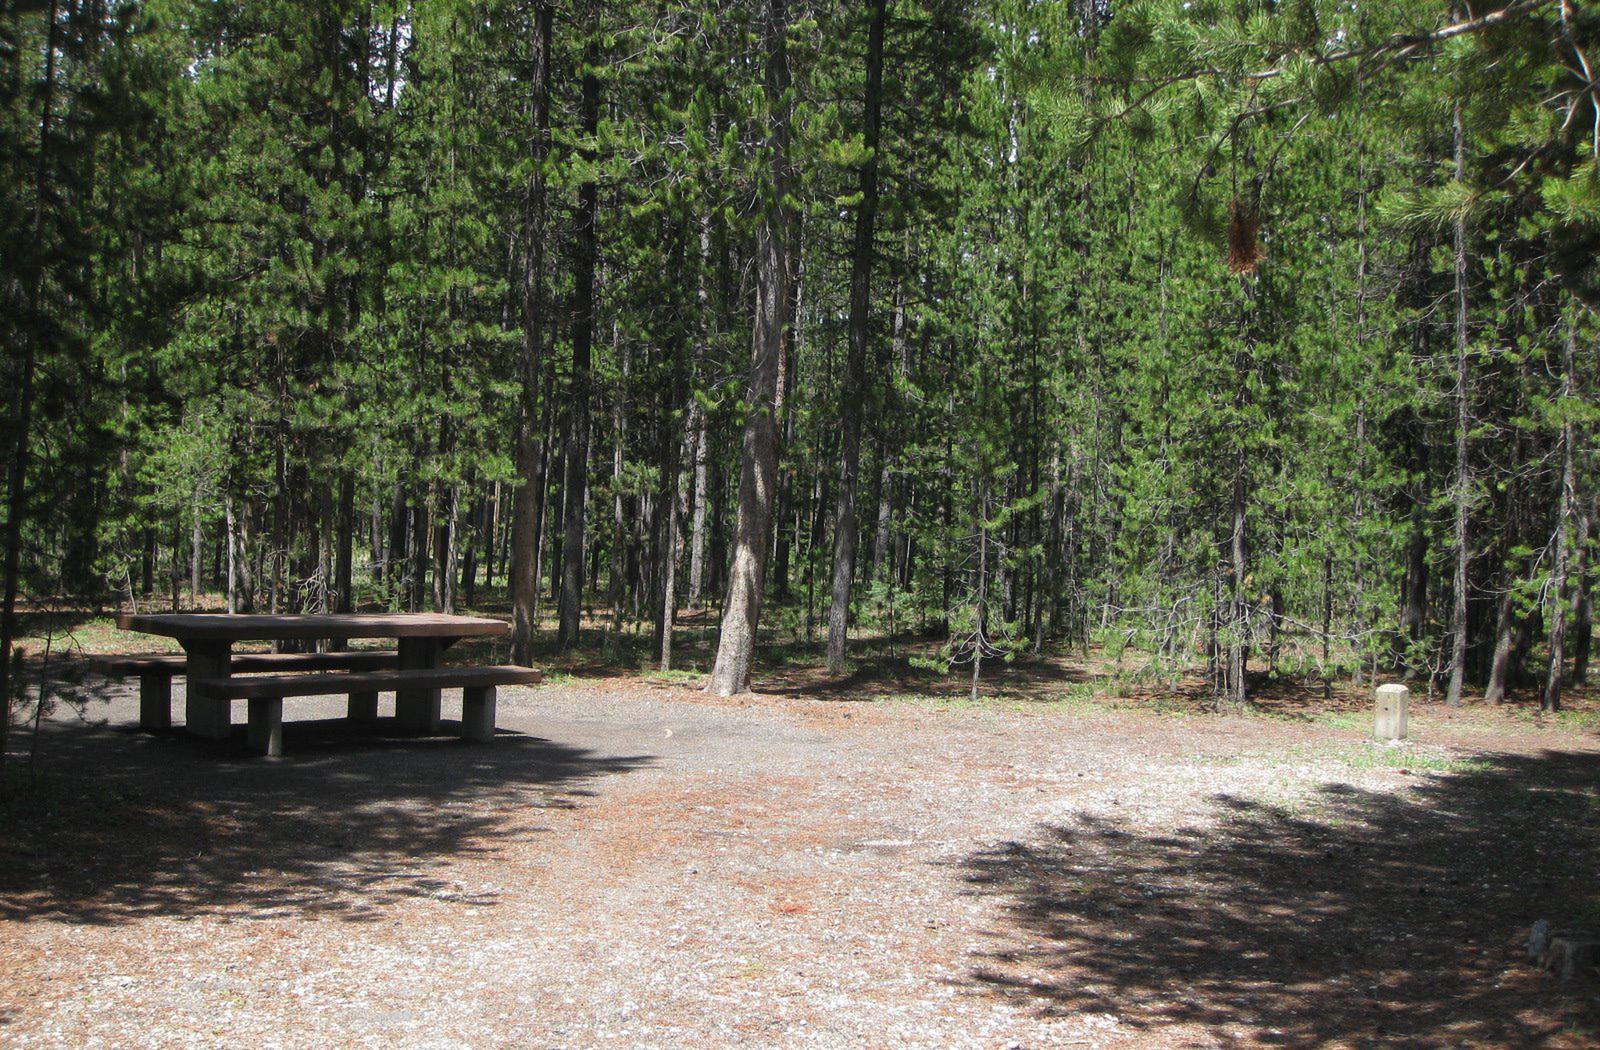 Site C6, surrounded by pine trees, picnic table & fire ringSite C6